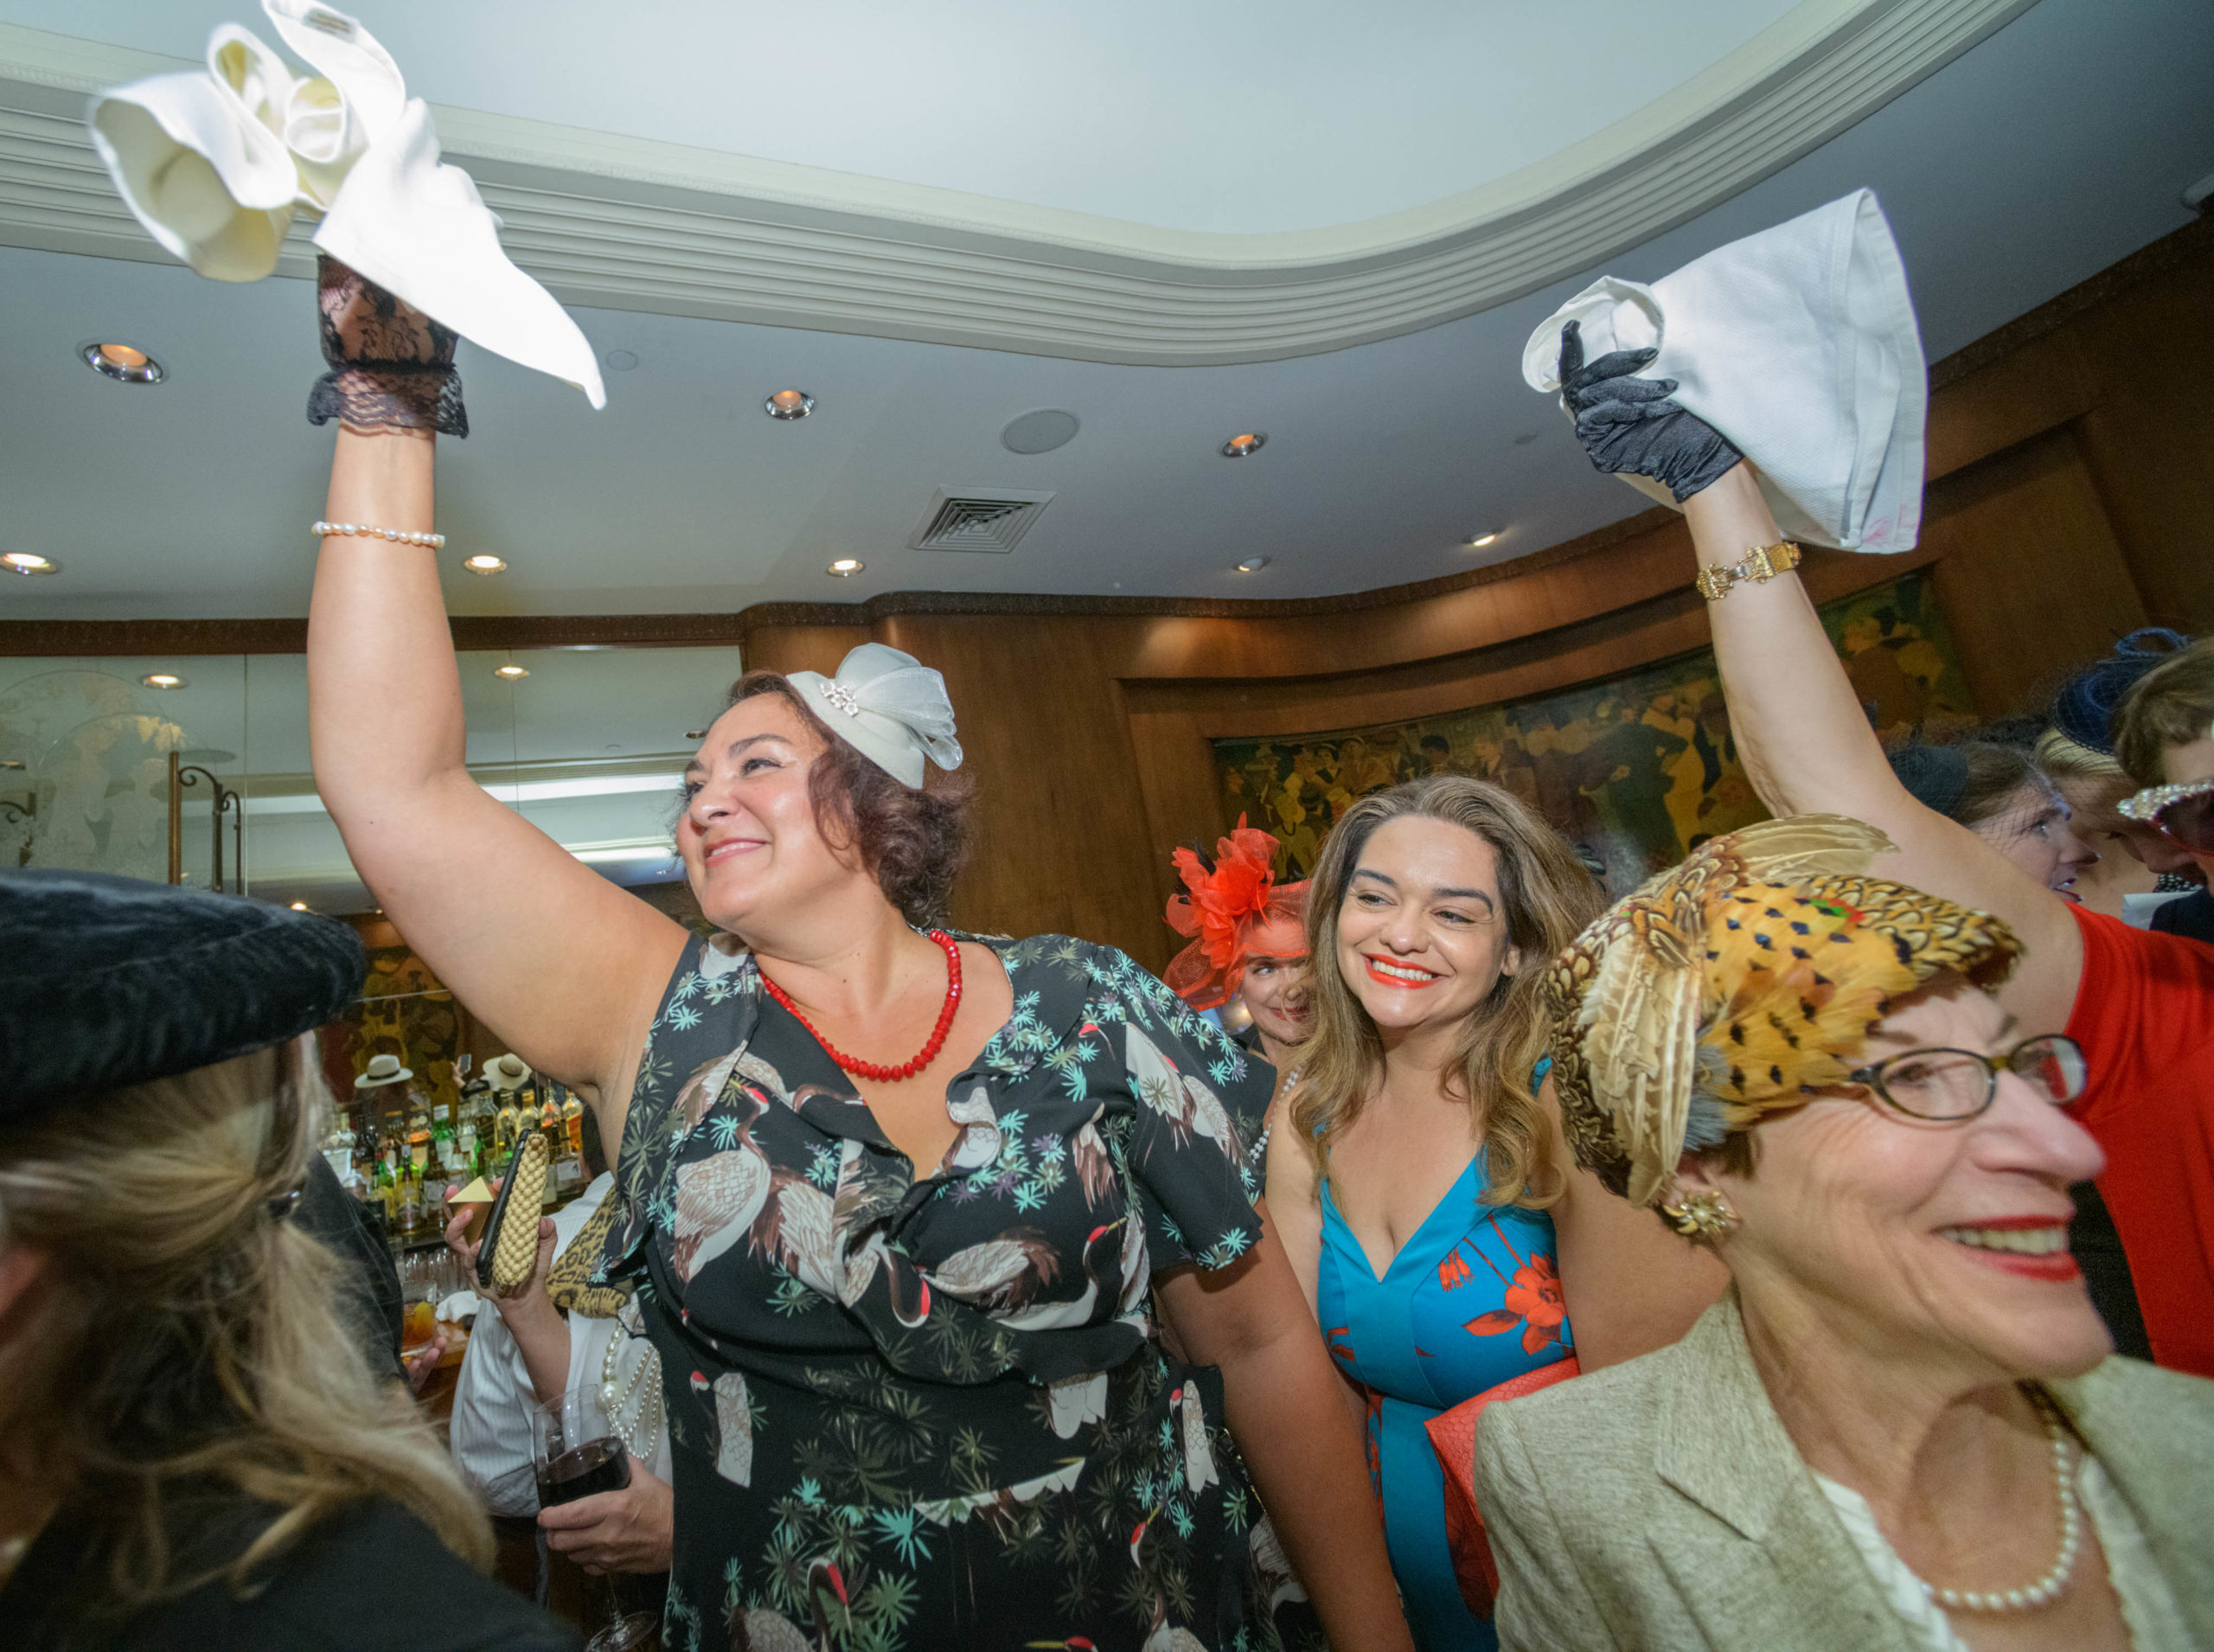 Women commemorate the 70th anniversary of the Stormin’ of the Sazerac bar at the Roosevelt Hotel in New Orleans, September 20, 2019. The Sazerac bar excluded women except on Mardi Gras until September 26, 1949 when women ‘stormed the bar.’ The event was celebrated first with a luncheon and fashion show at the Blue Room before the group of women second lined to the Sazerac bar with music by the Twisty River Band. WDSU anchor Charles Divins hosted and WDSU Chief Meteorologist Margaret Orr, who was the reigning Spirit of the Sazerac, announced this year’s Spirit as Meaghan Ryan Bonavita, the president of Dress for Success New Orleans that provides women in need with clothing for jobs. Photo by Matthew Hinton